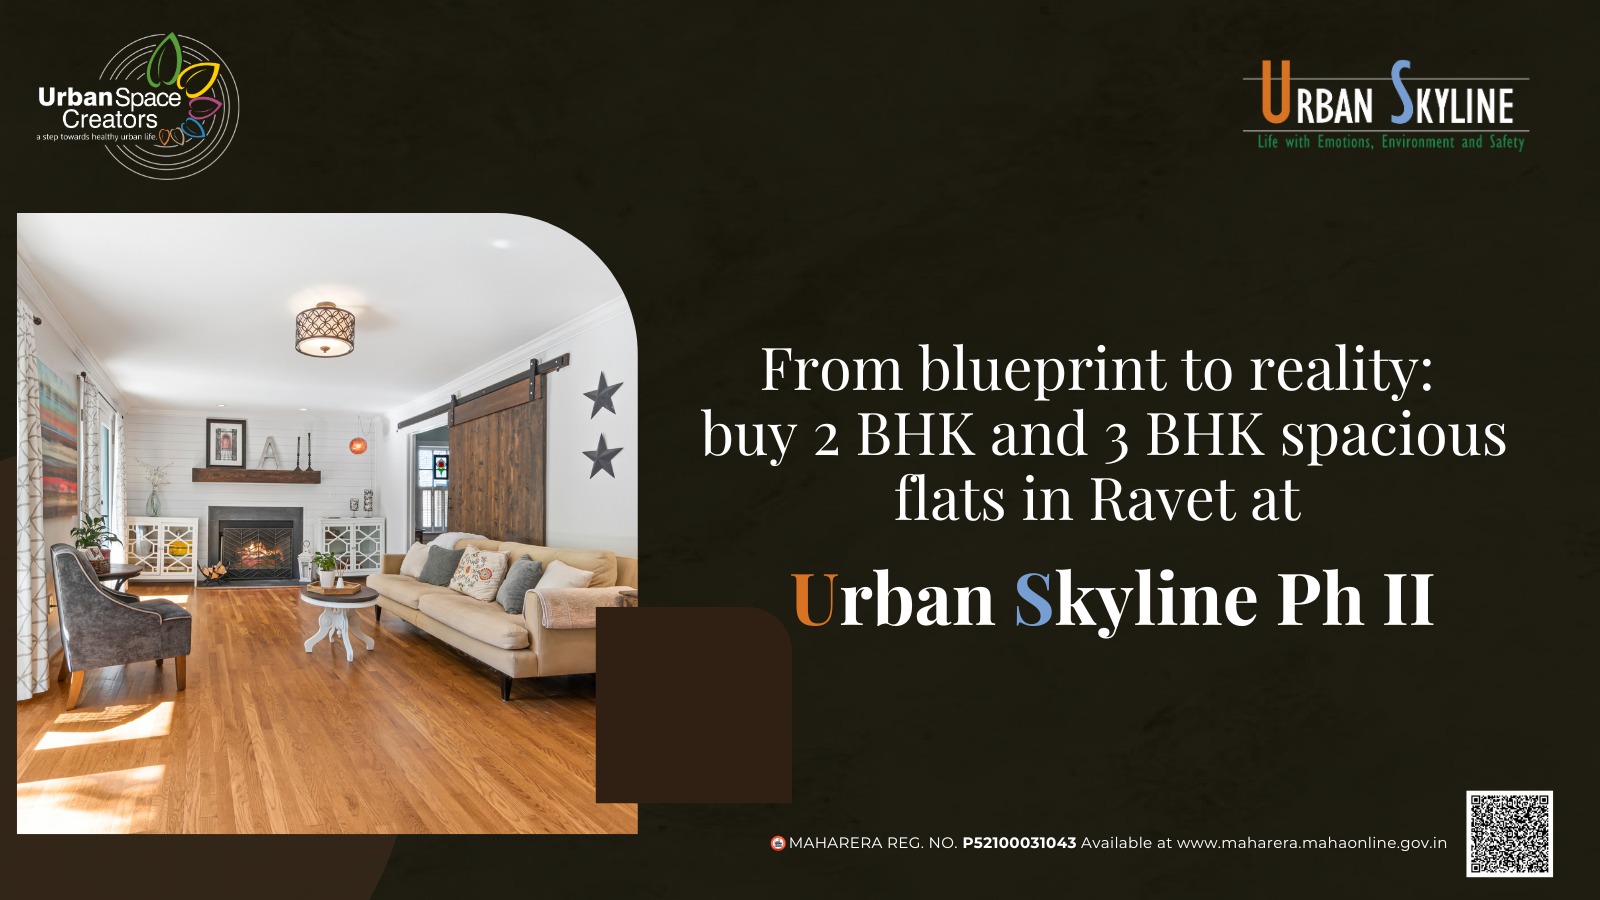 From blueprint to reality: Buy 2 BHK and 3 BHK spacious flats in Ravet at Urban Skyline Phase 2